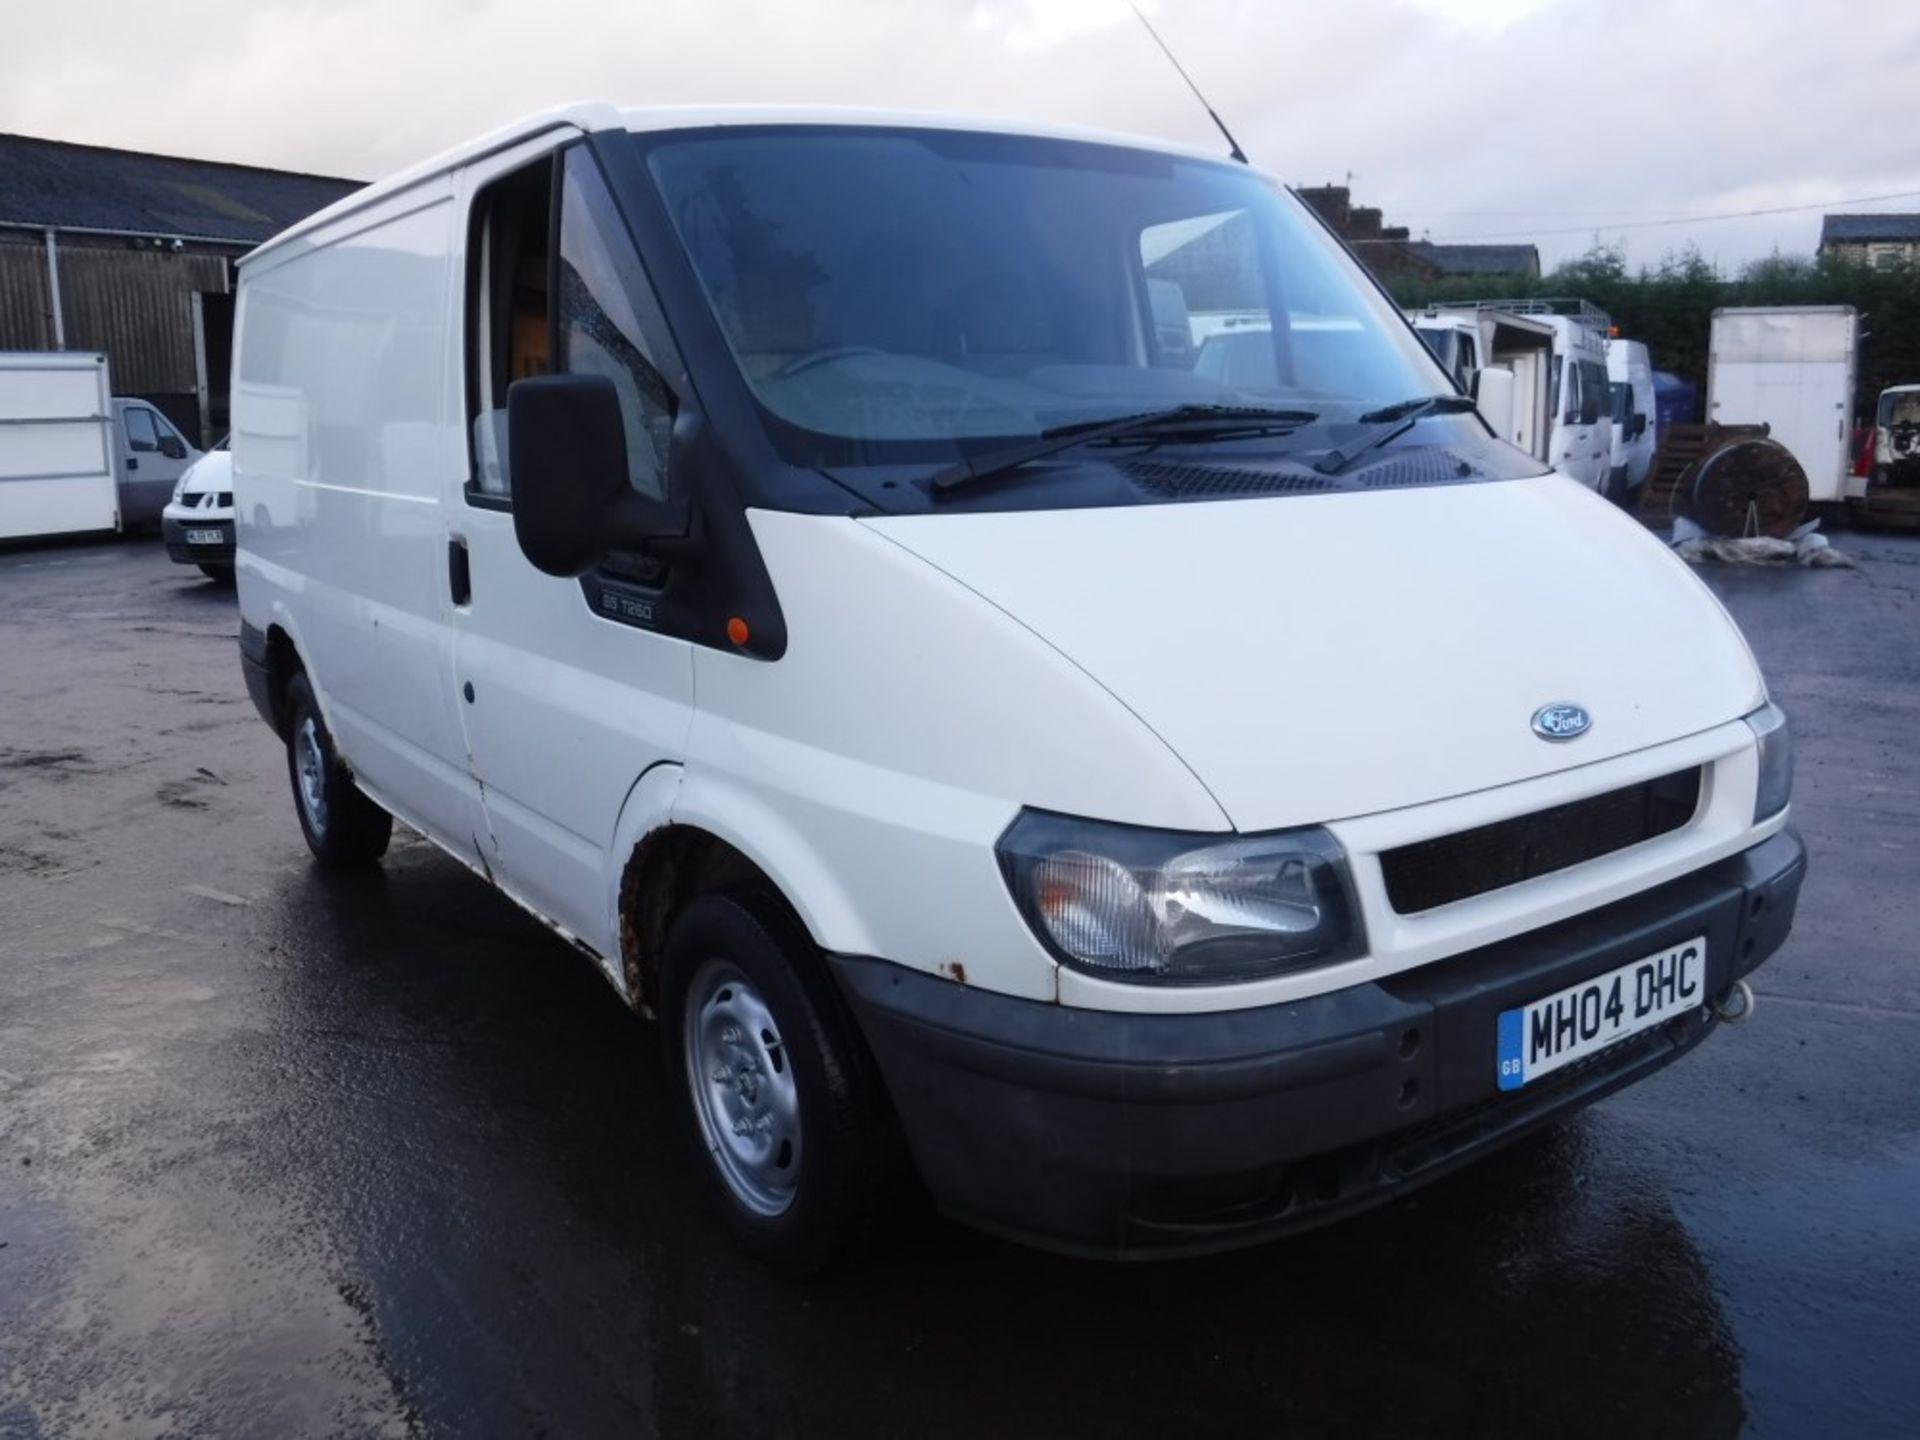 04 reg FORD TRANSIT 260 SWB, 1ST REG 08/04, 101391M NOT WARRANTED, V5 HERE, 4 FORMER KEEPERS [NO